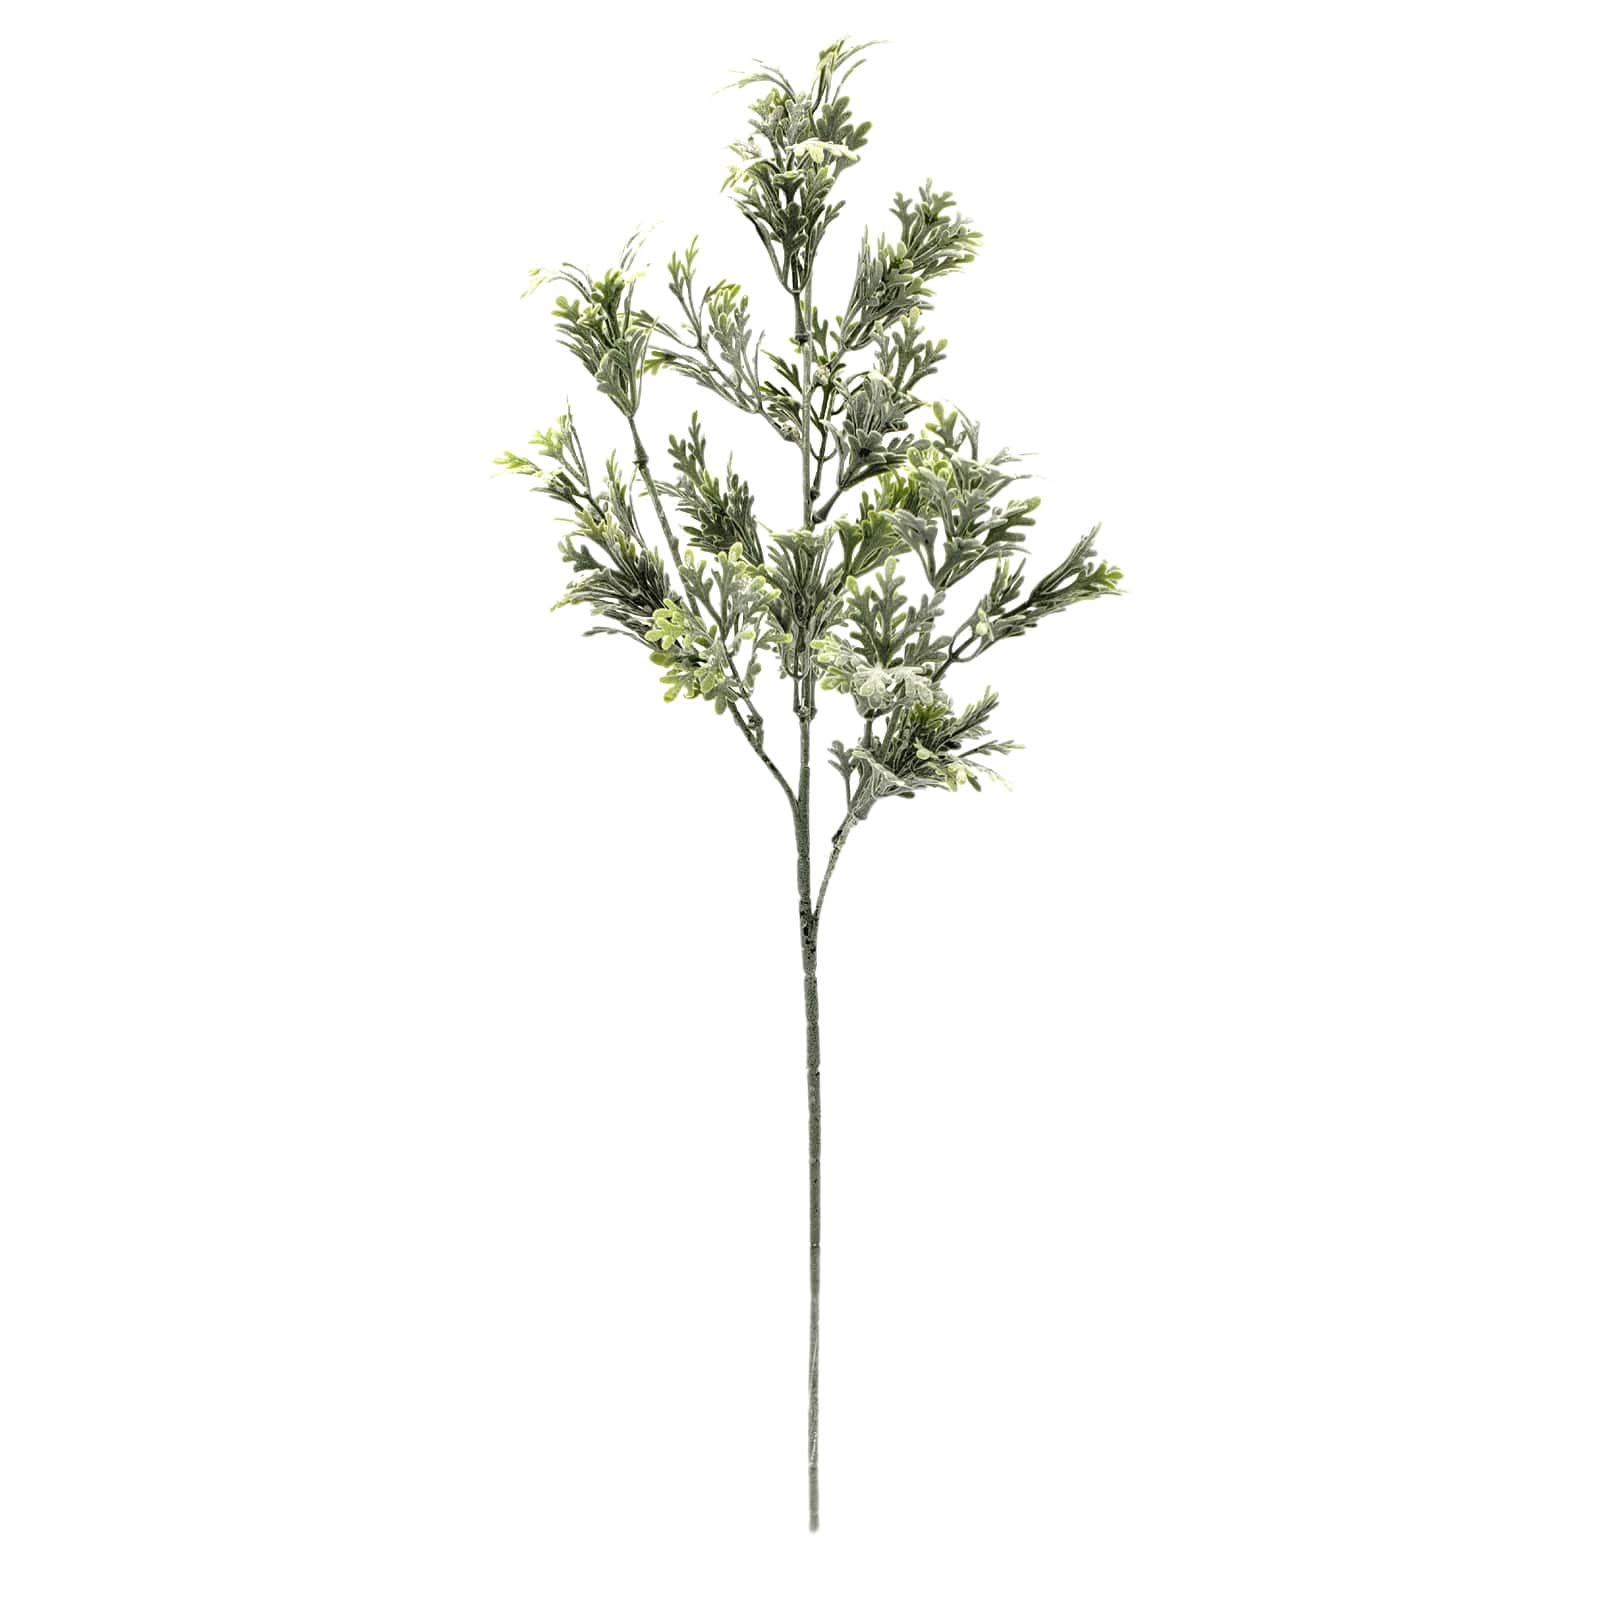 Shop for the Frosted Dusty Miller Stem by Ashland® at Michaels